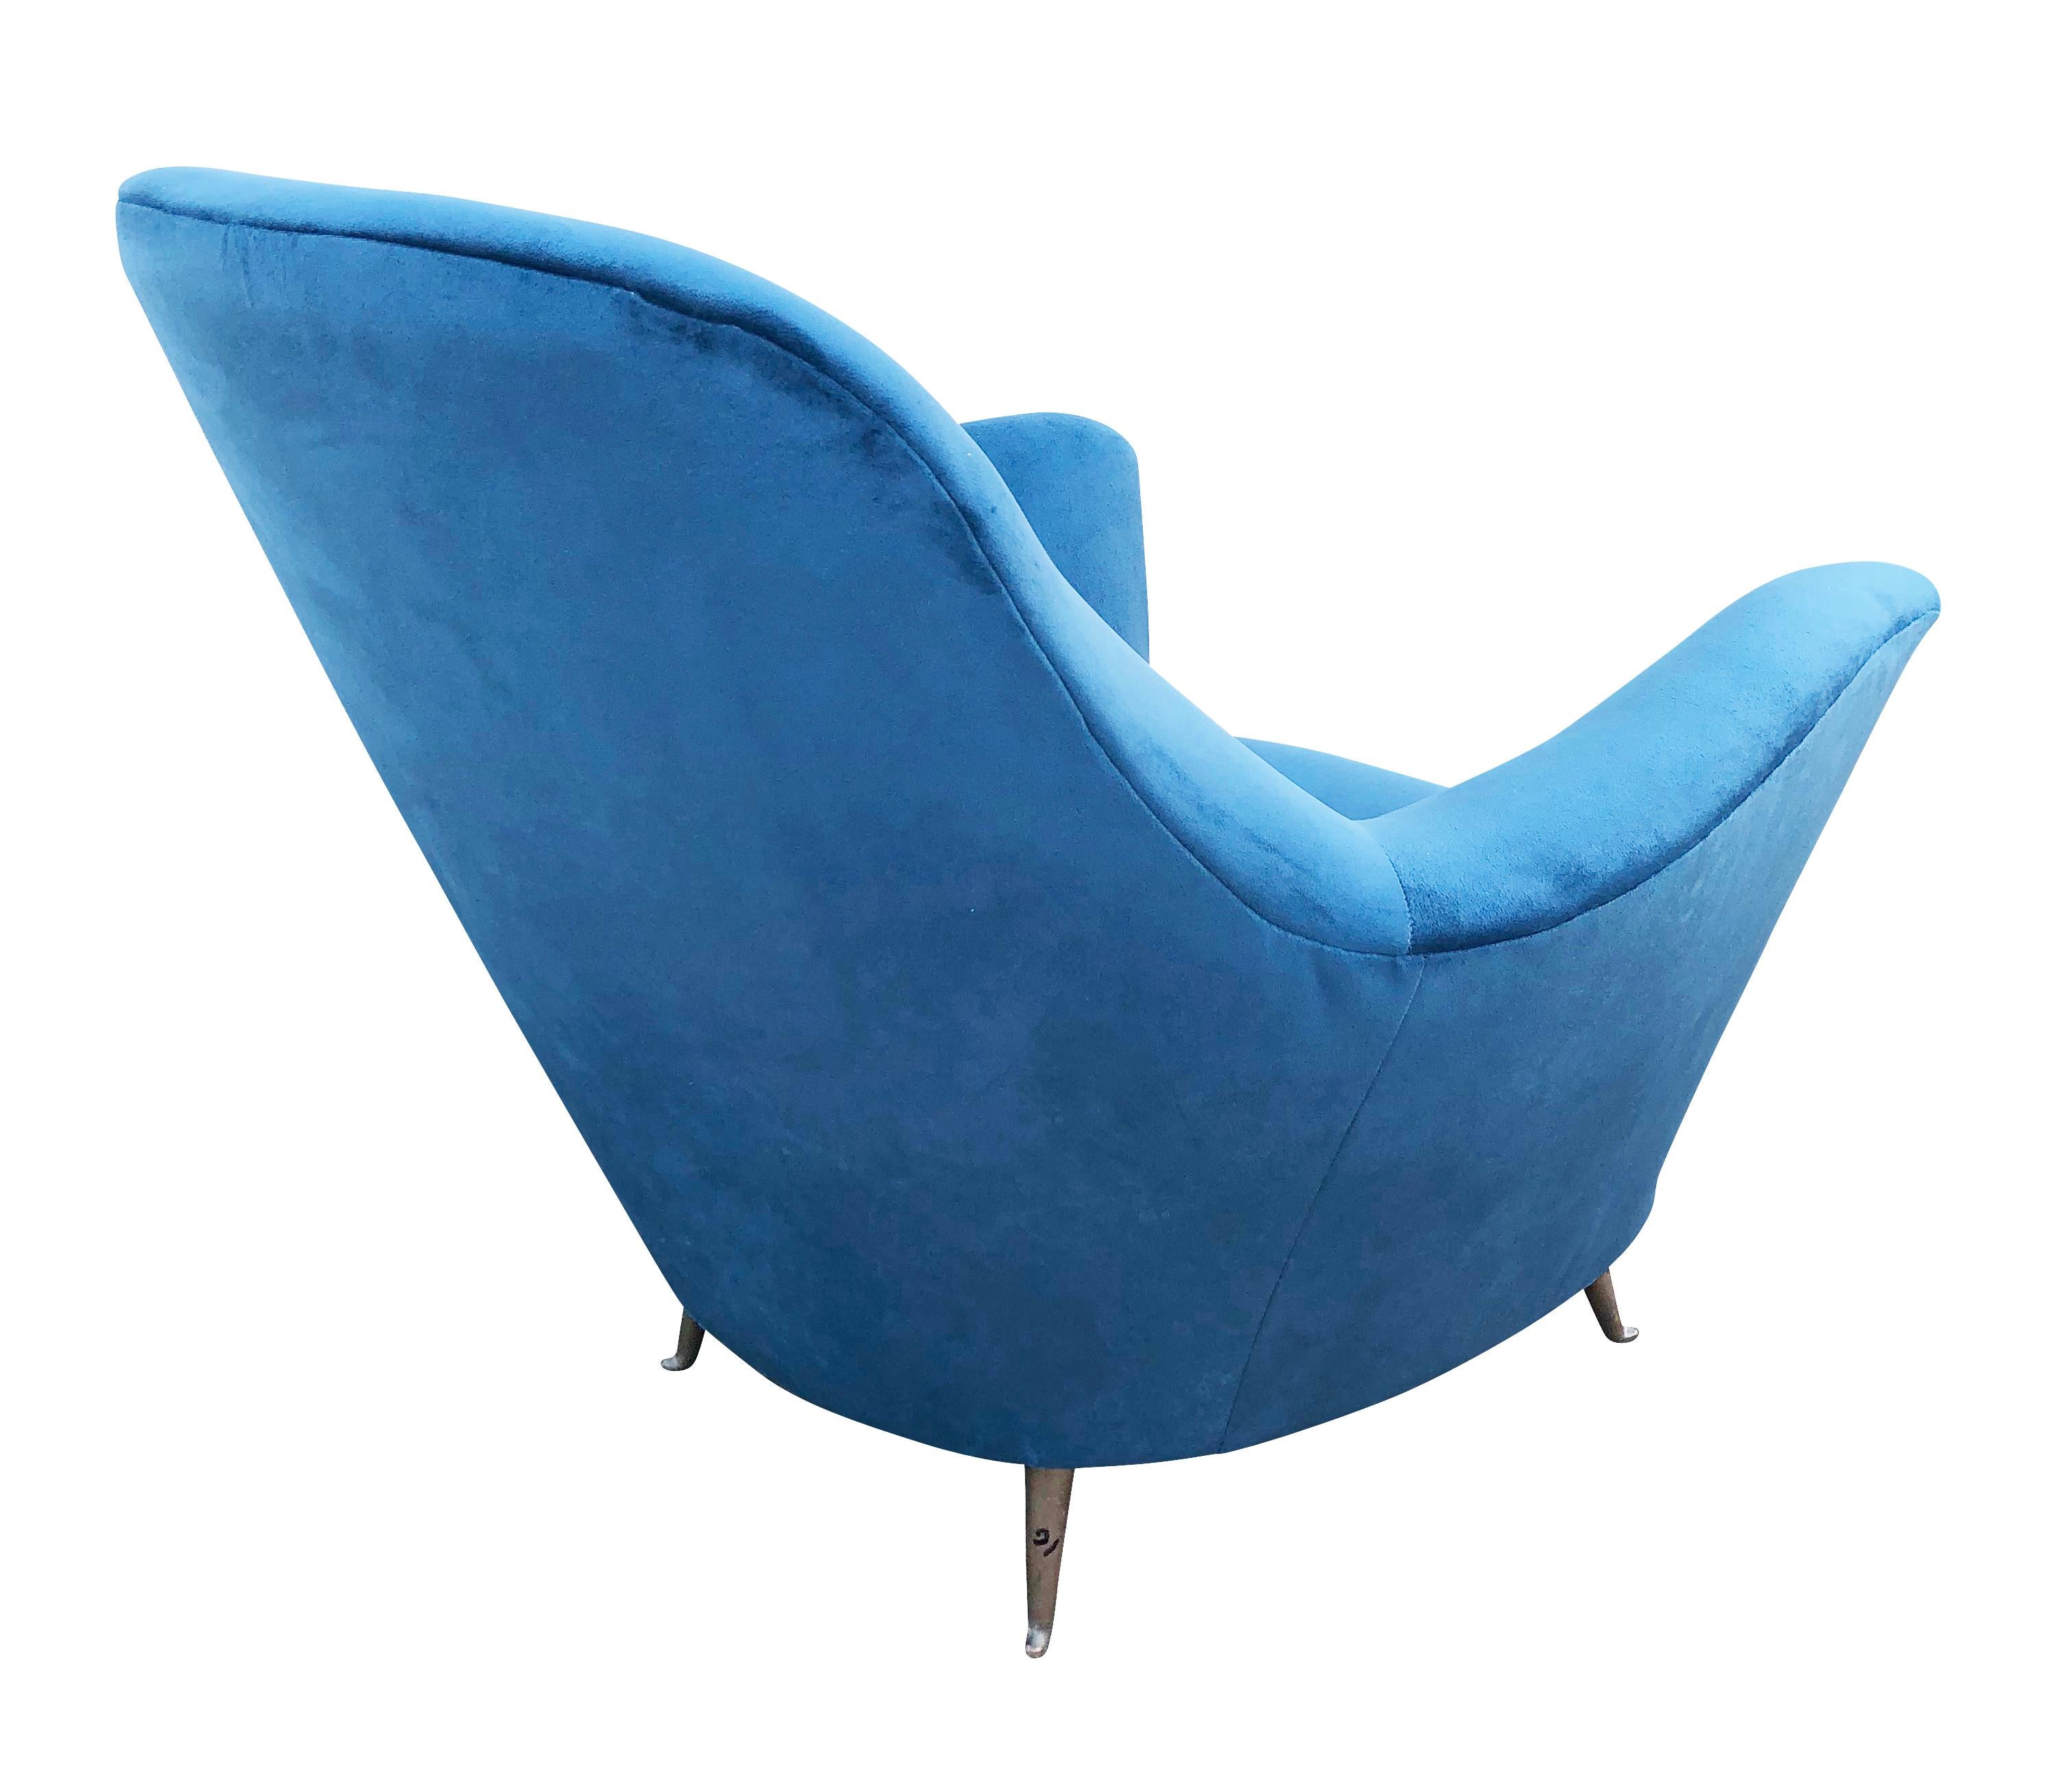 Mid-Century Modern Pair of Lounge Chairs by Veronesi for ISA, Italy, 1960s